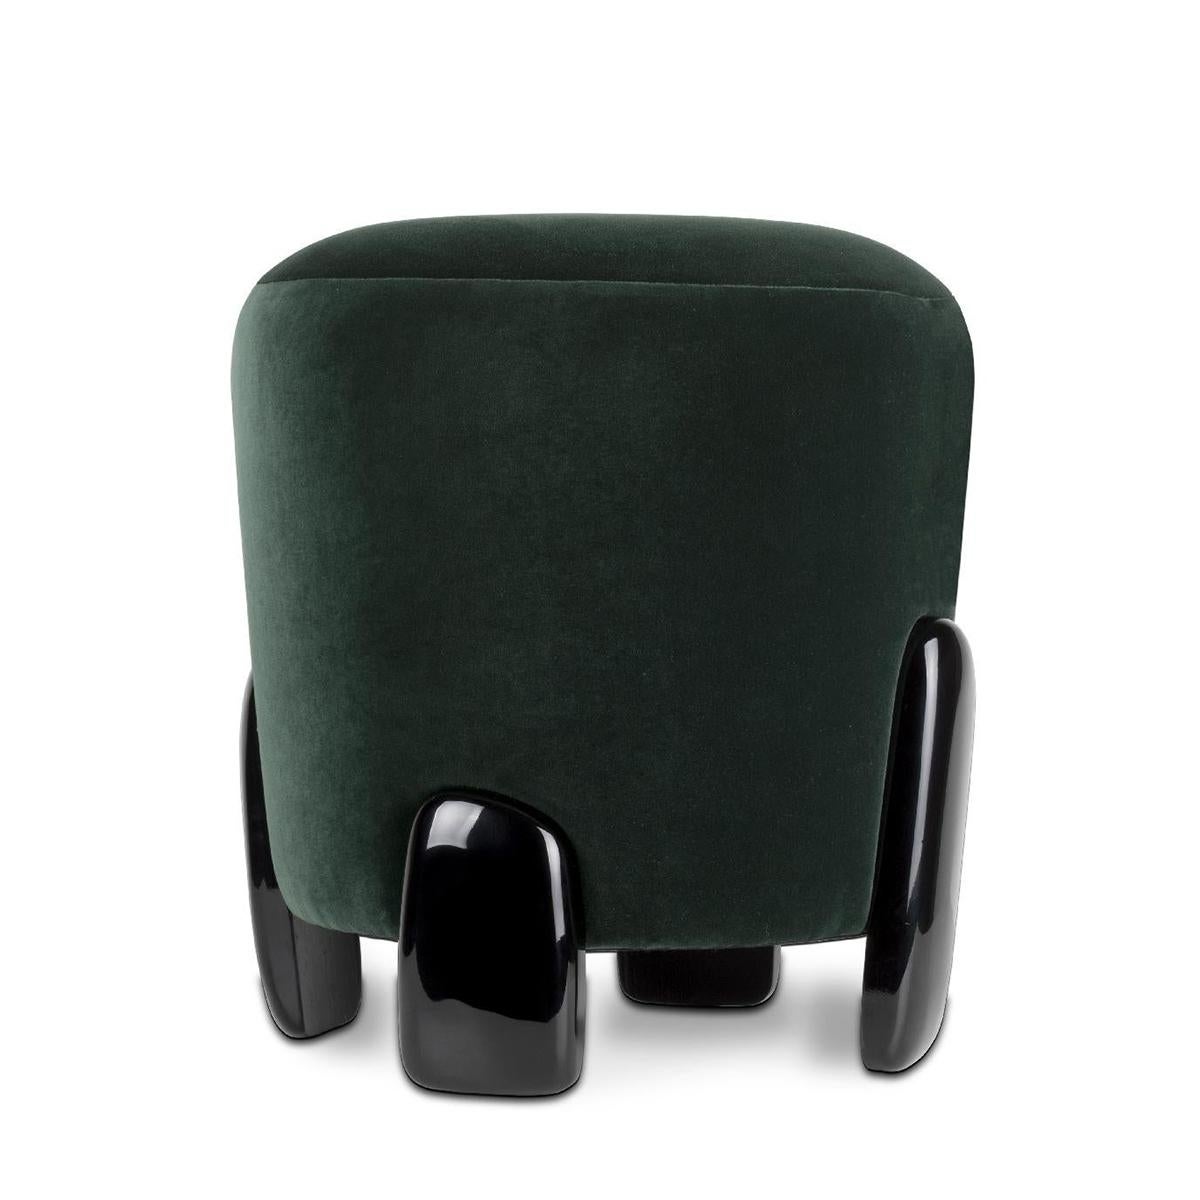 Stool penny with solid wood structure, upholstered and
covered with bristish green velvet fabric. With 3 feet in
black lacquered finish.
Also available with other velvet fabric colors, on request.